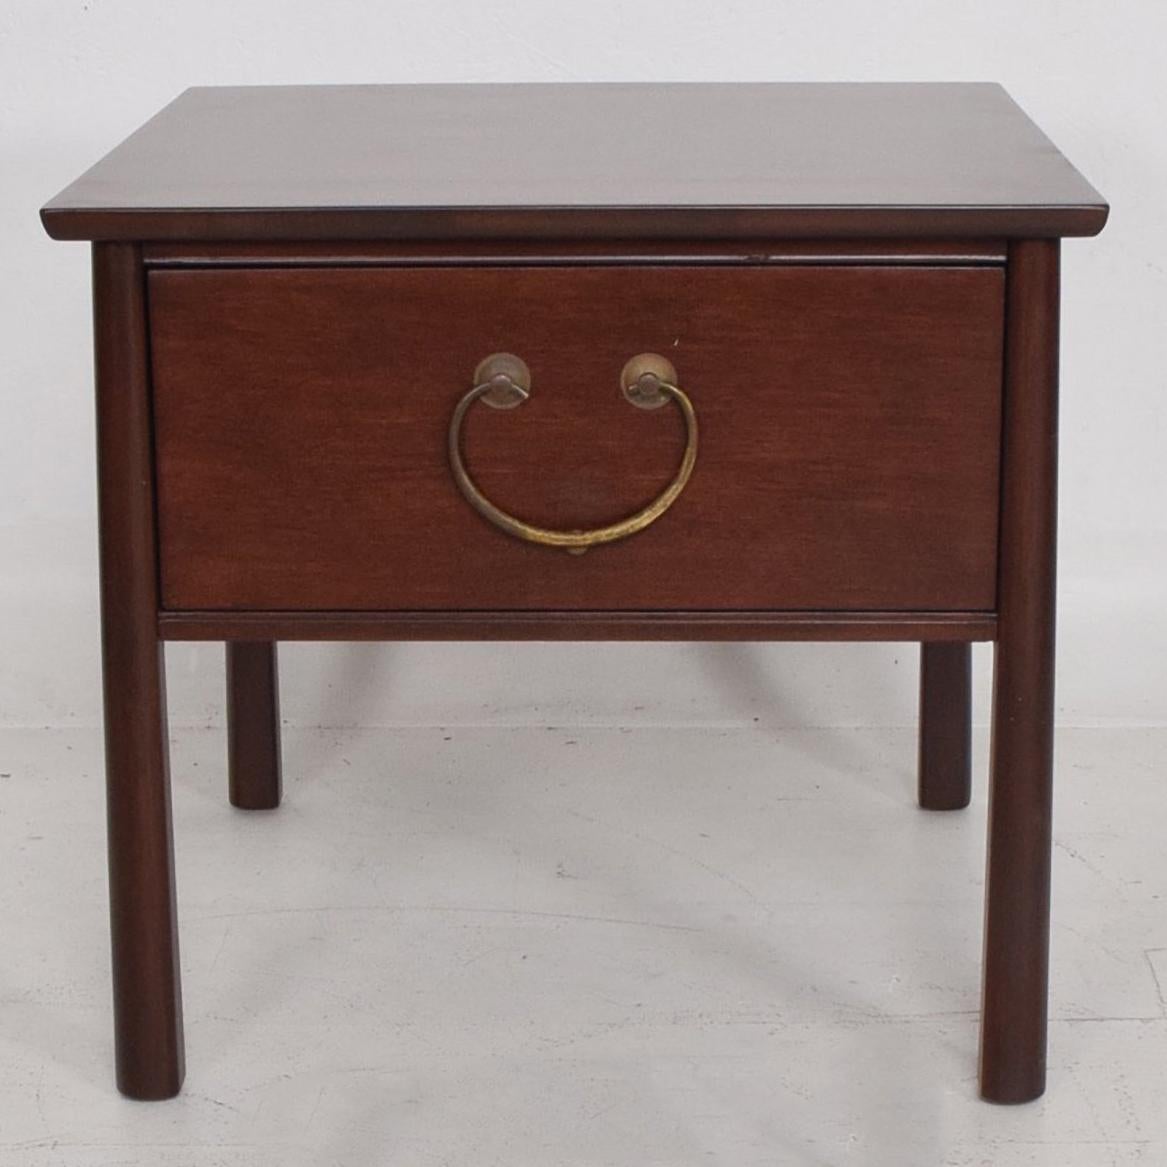 For your consideration a beautiful side table in mahogany wood with decorative brass pull,

USA, circa 1950s. Stamped HERITAGE.

Measure: 23 1/4" T x 25" D x 25" W 

